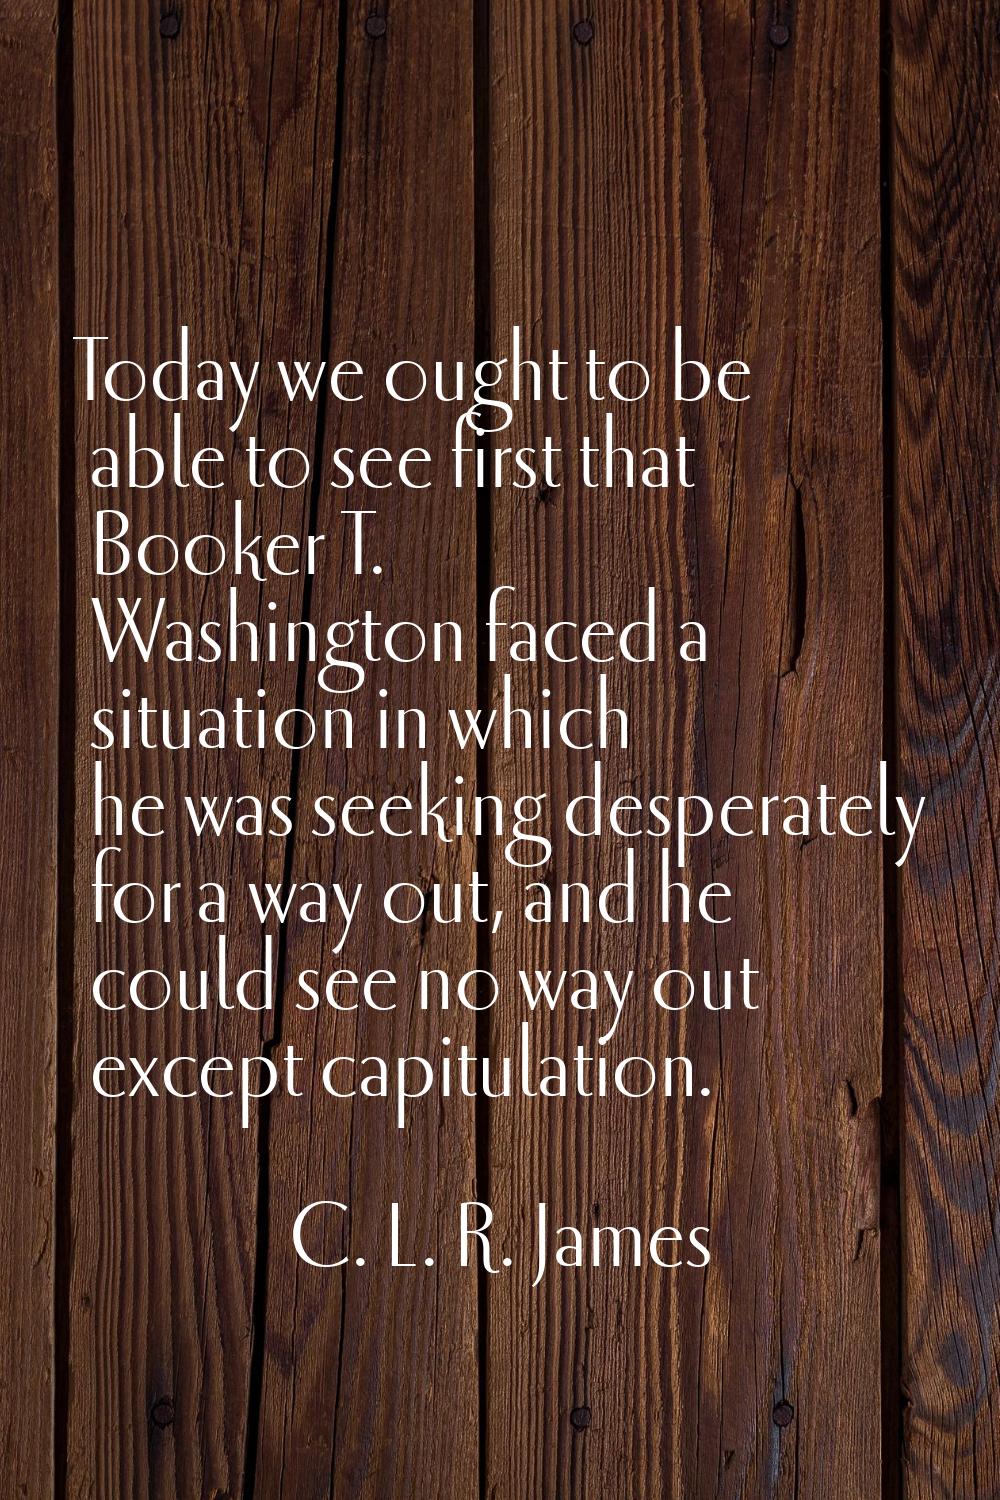 Today we ought to be able to see first that Booker T. Washington faced a situation in which he was 